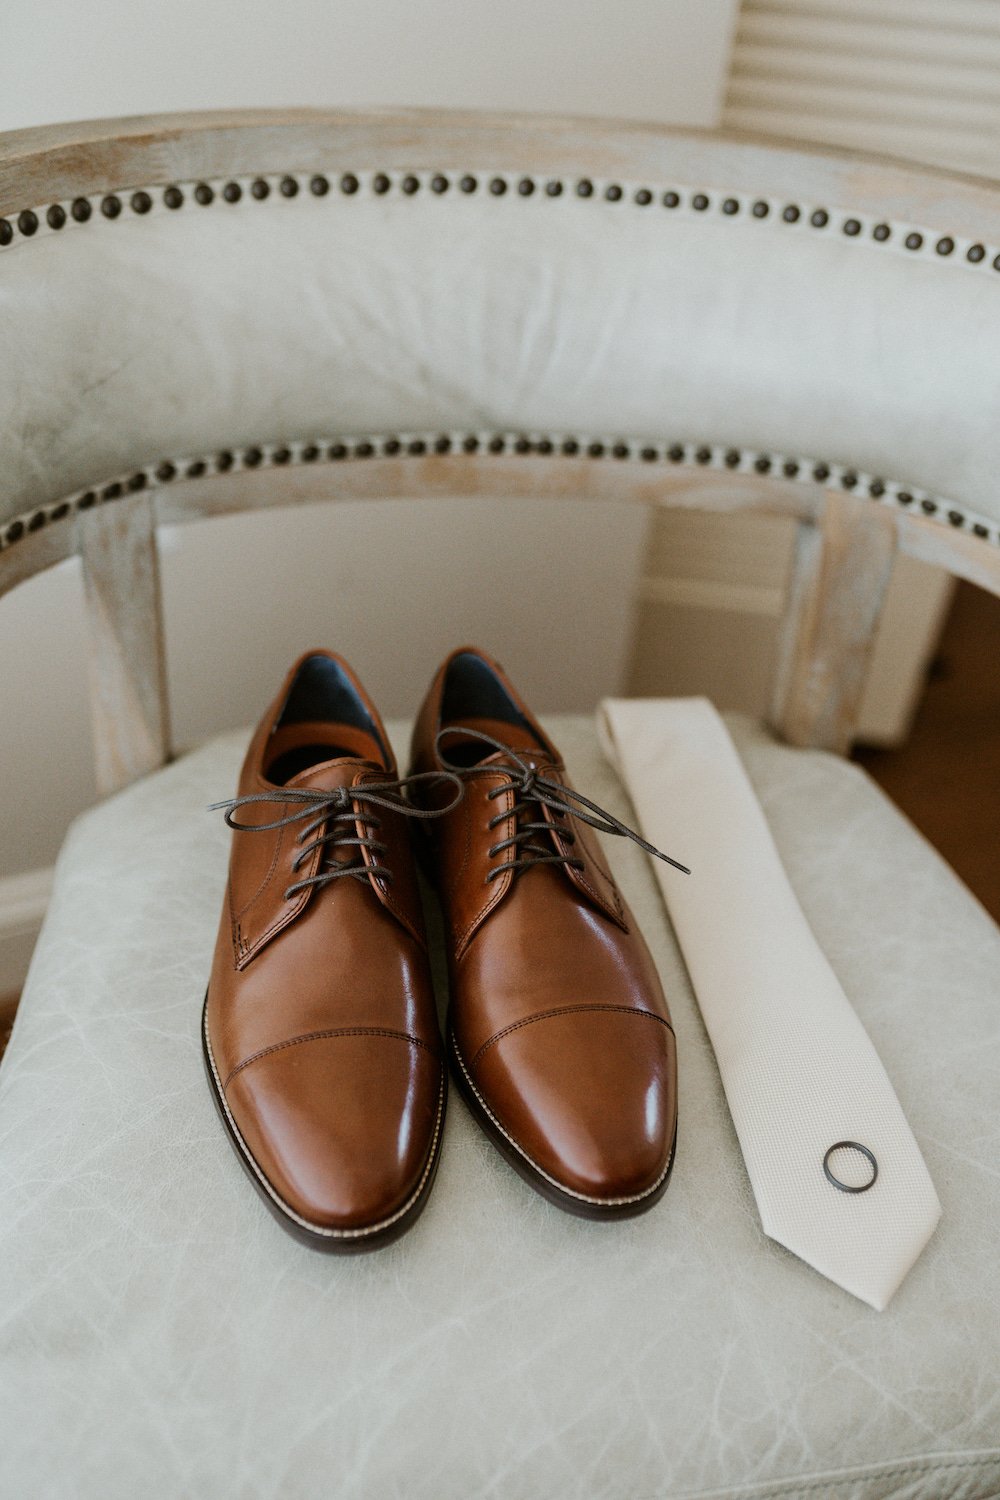 The grooms dress shoes, tie and ring sitting on the chair.